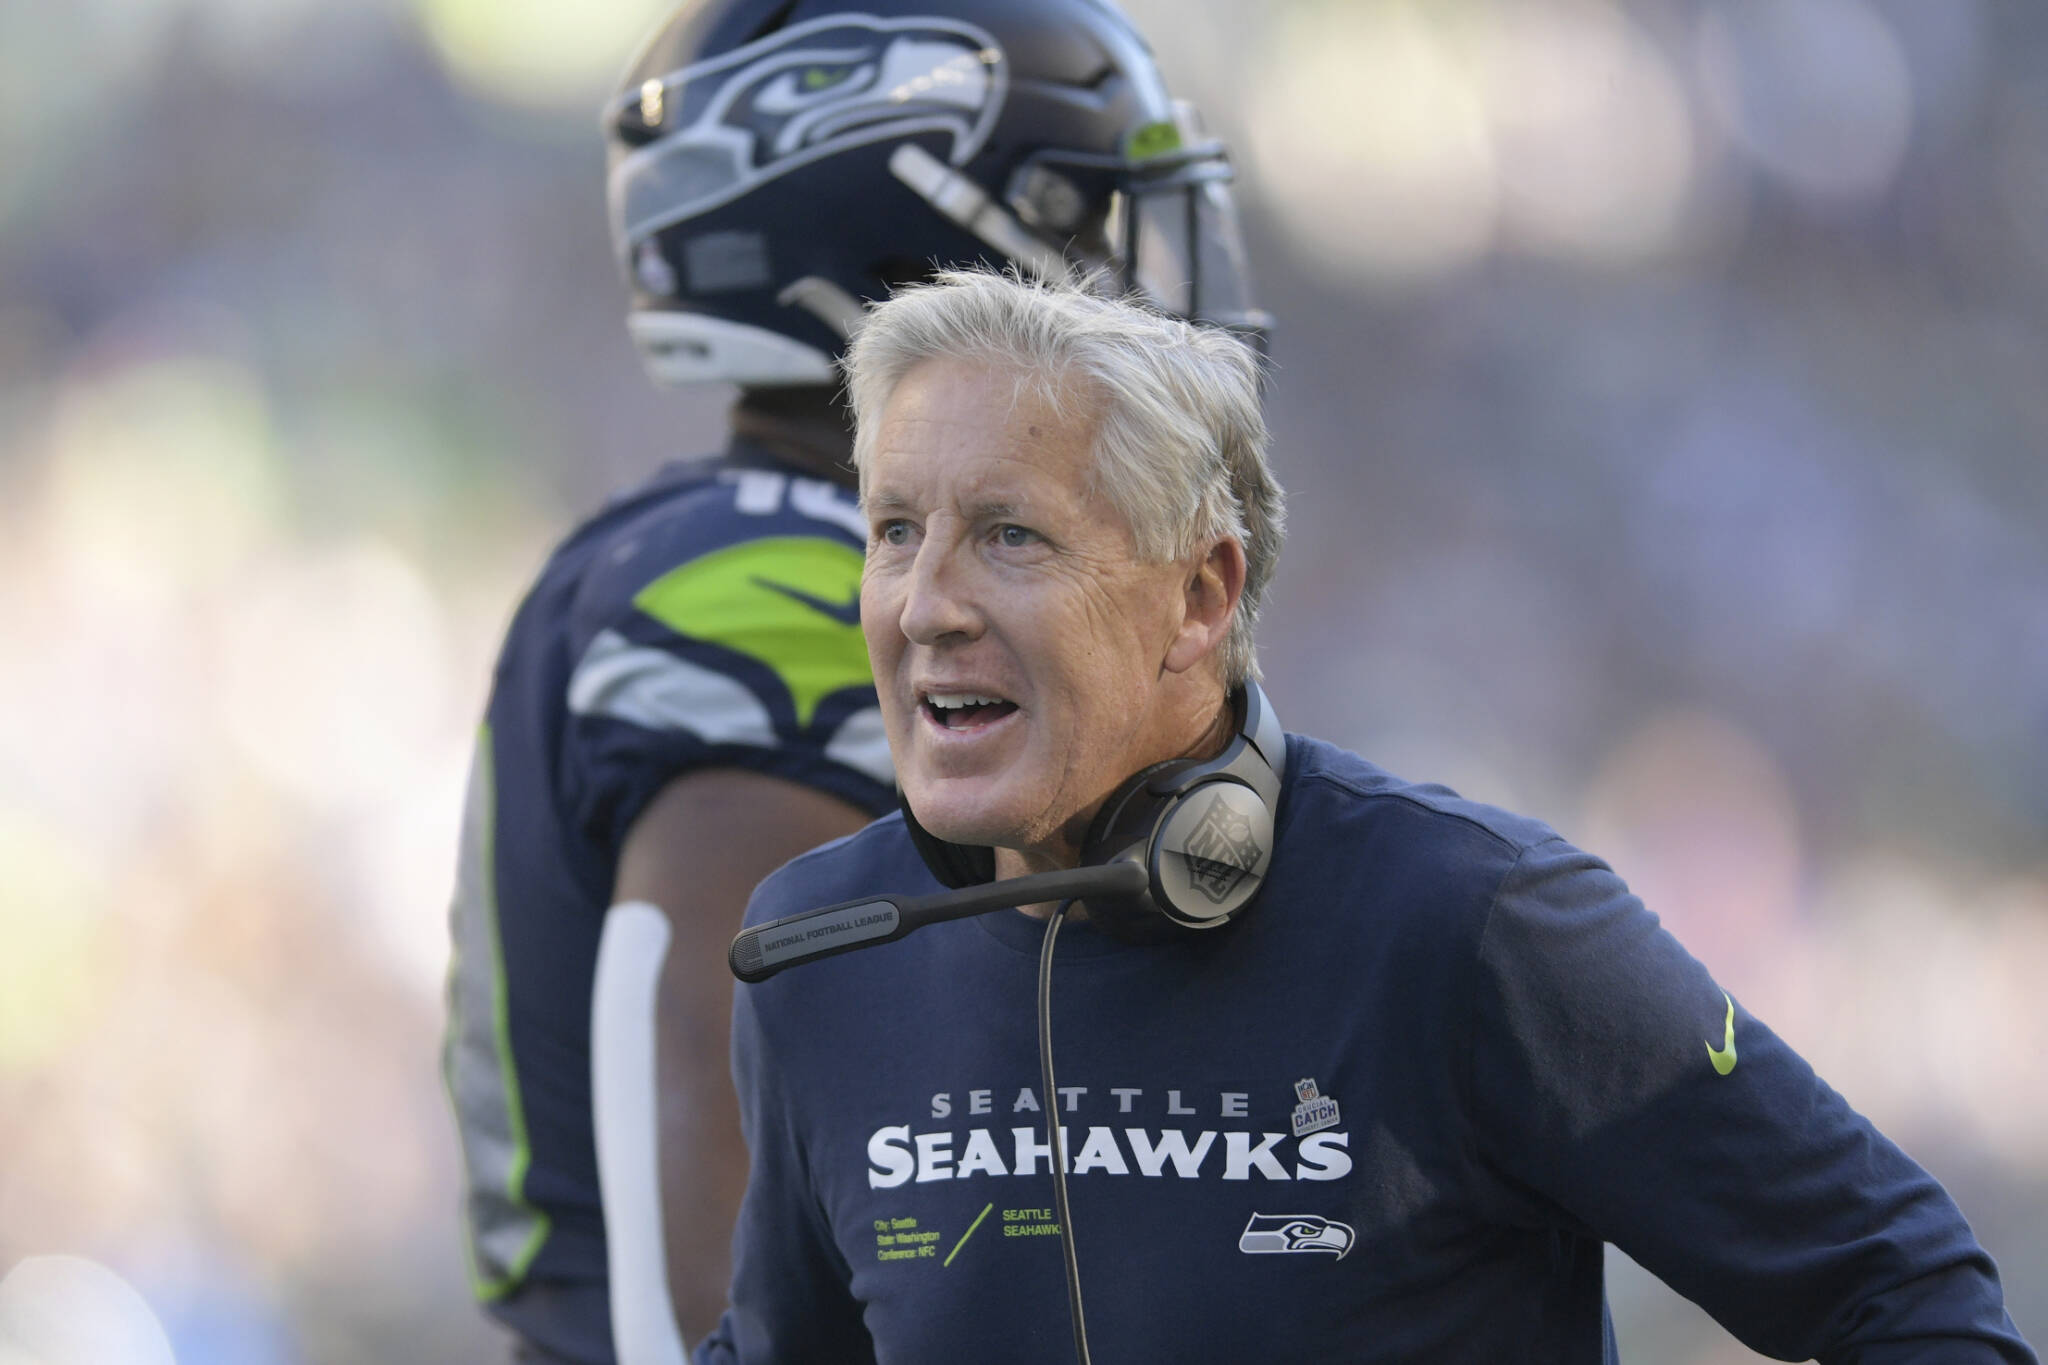 Seattle Seahawks head coach Pete Carroll greets players during the second half of his team's NFL football game against the Arizona Cardinals in Seattle, Sunday, Oct. 16, 2022. (AP Photo/Caean Couto)